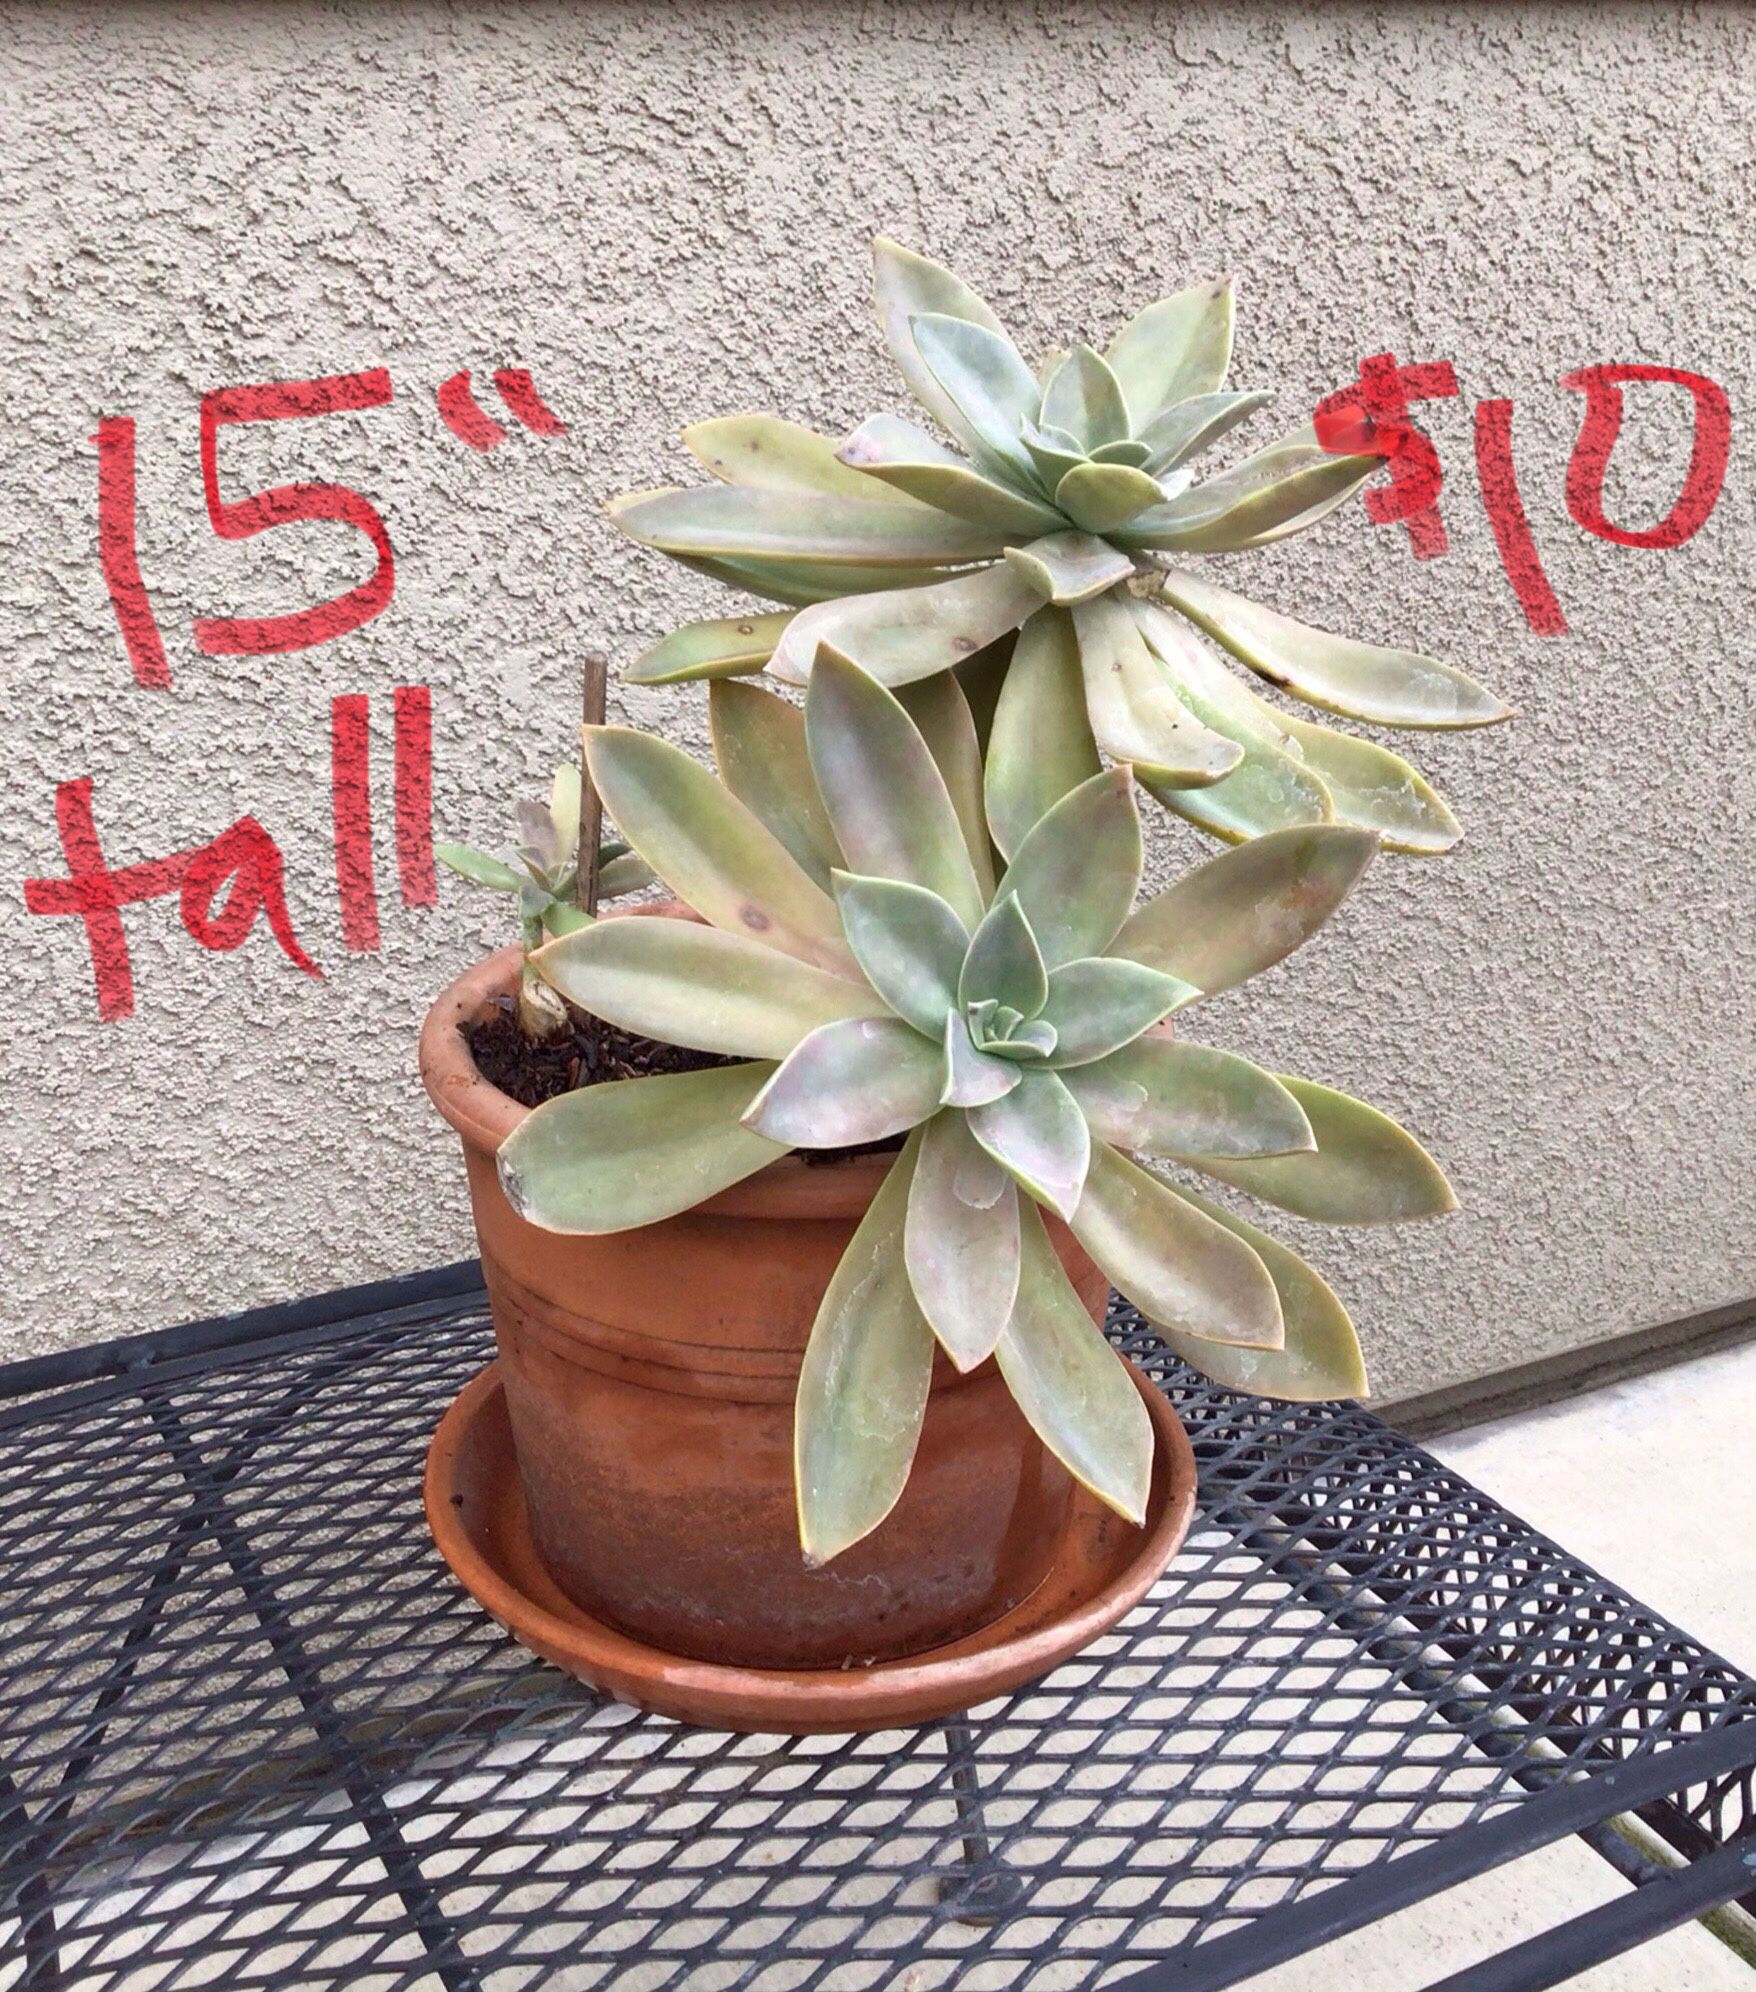 Succulents And Potted Plants … $10 - $30